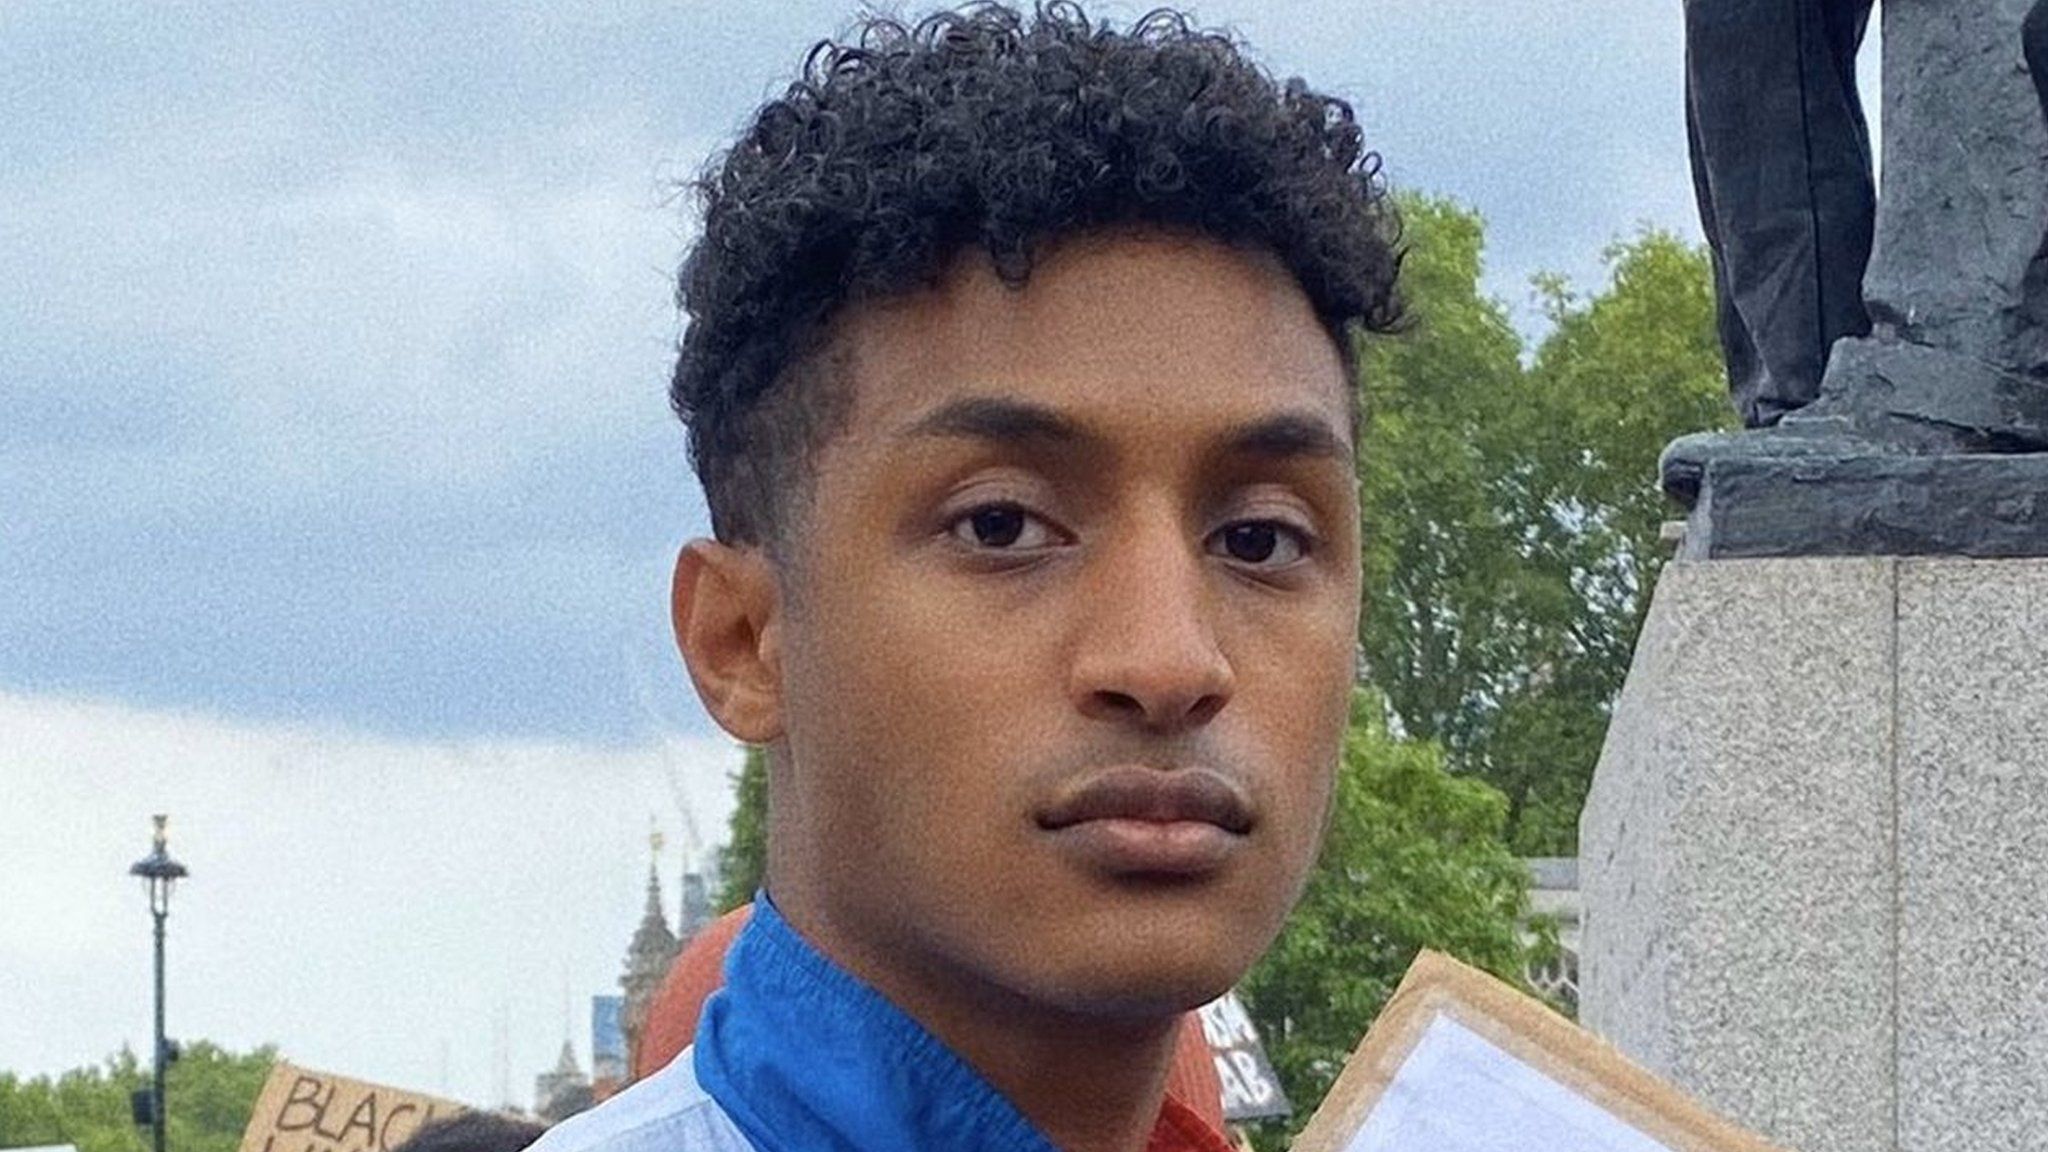 Momo attended Black Lives Matter protests in Central London on 3 June - little did he know this picture would result in a tirade of racist abuse.